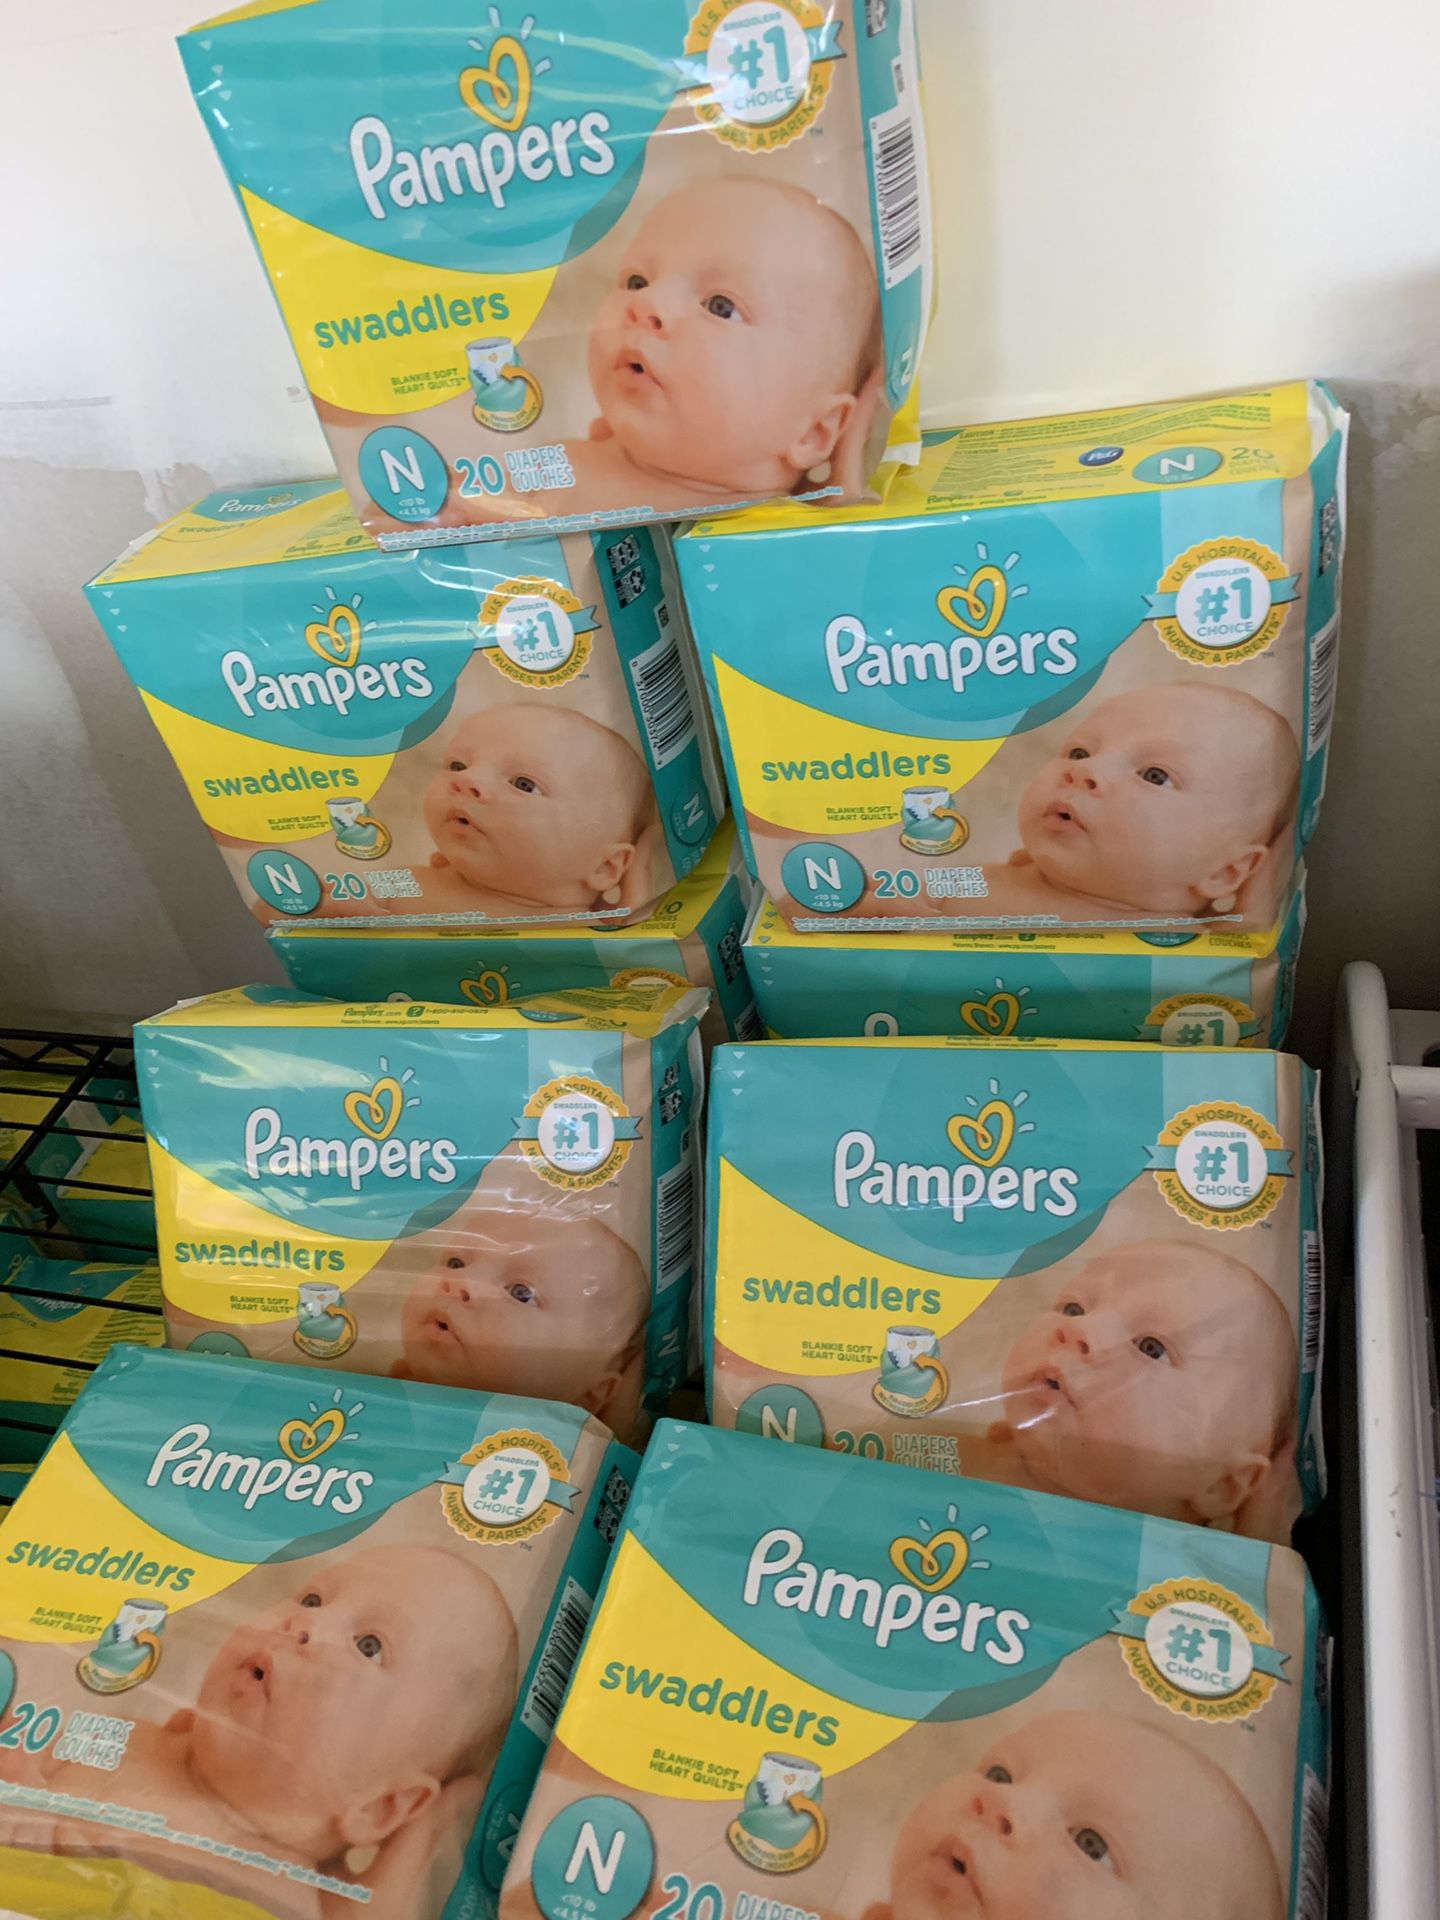 Pampers newborn diapers 3 bags for $10